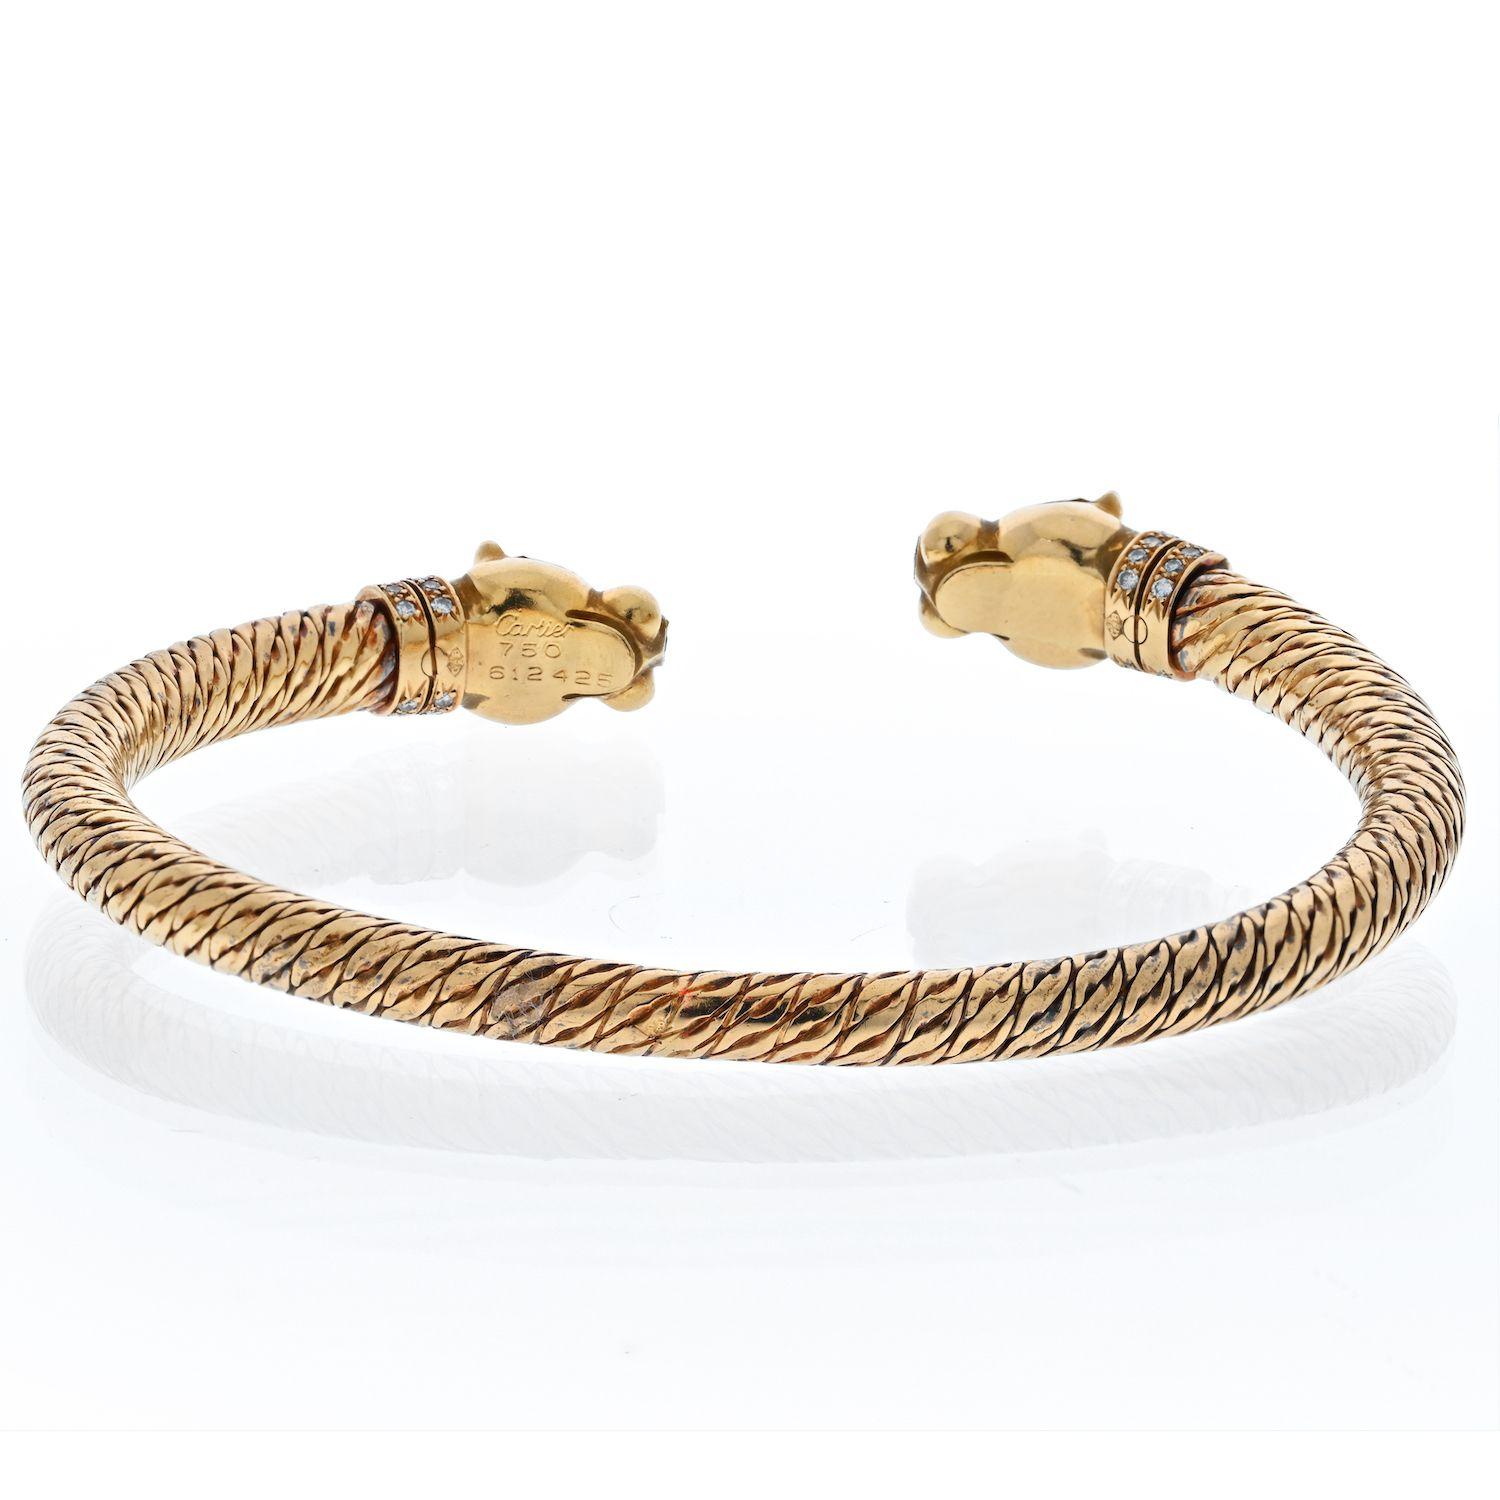 Cartier double headed panthere bangle bracelet made in 18k yellow textured gold. Panther eyes are set with marquise-cut blue sapphires and noses made of black onyx. This series of Cartier Panthere has been discontinued for over 20 years, making this